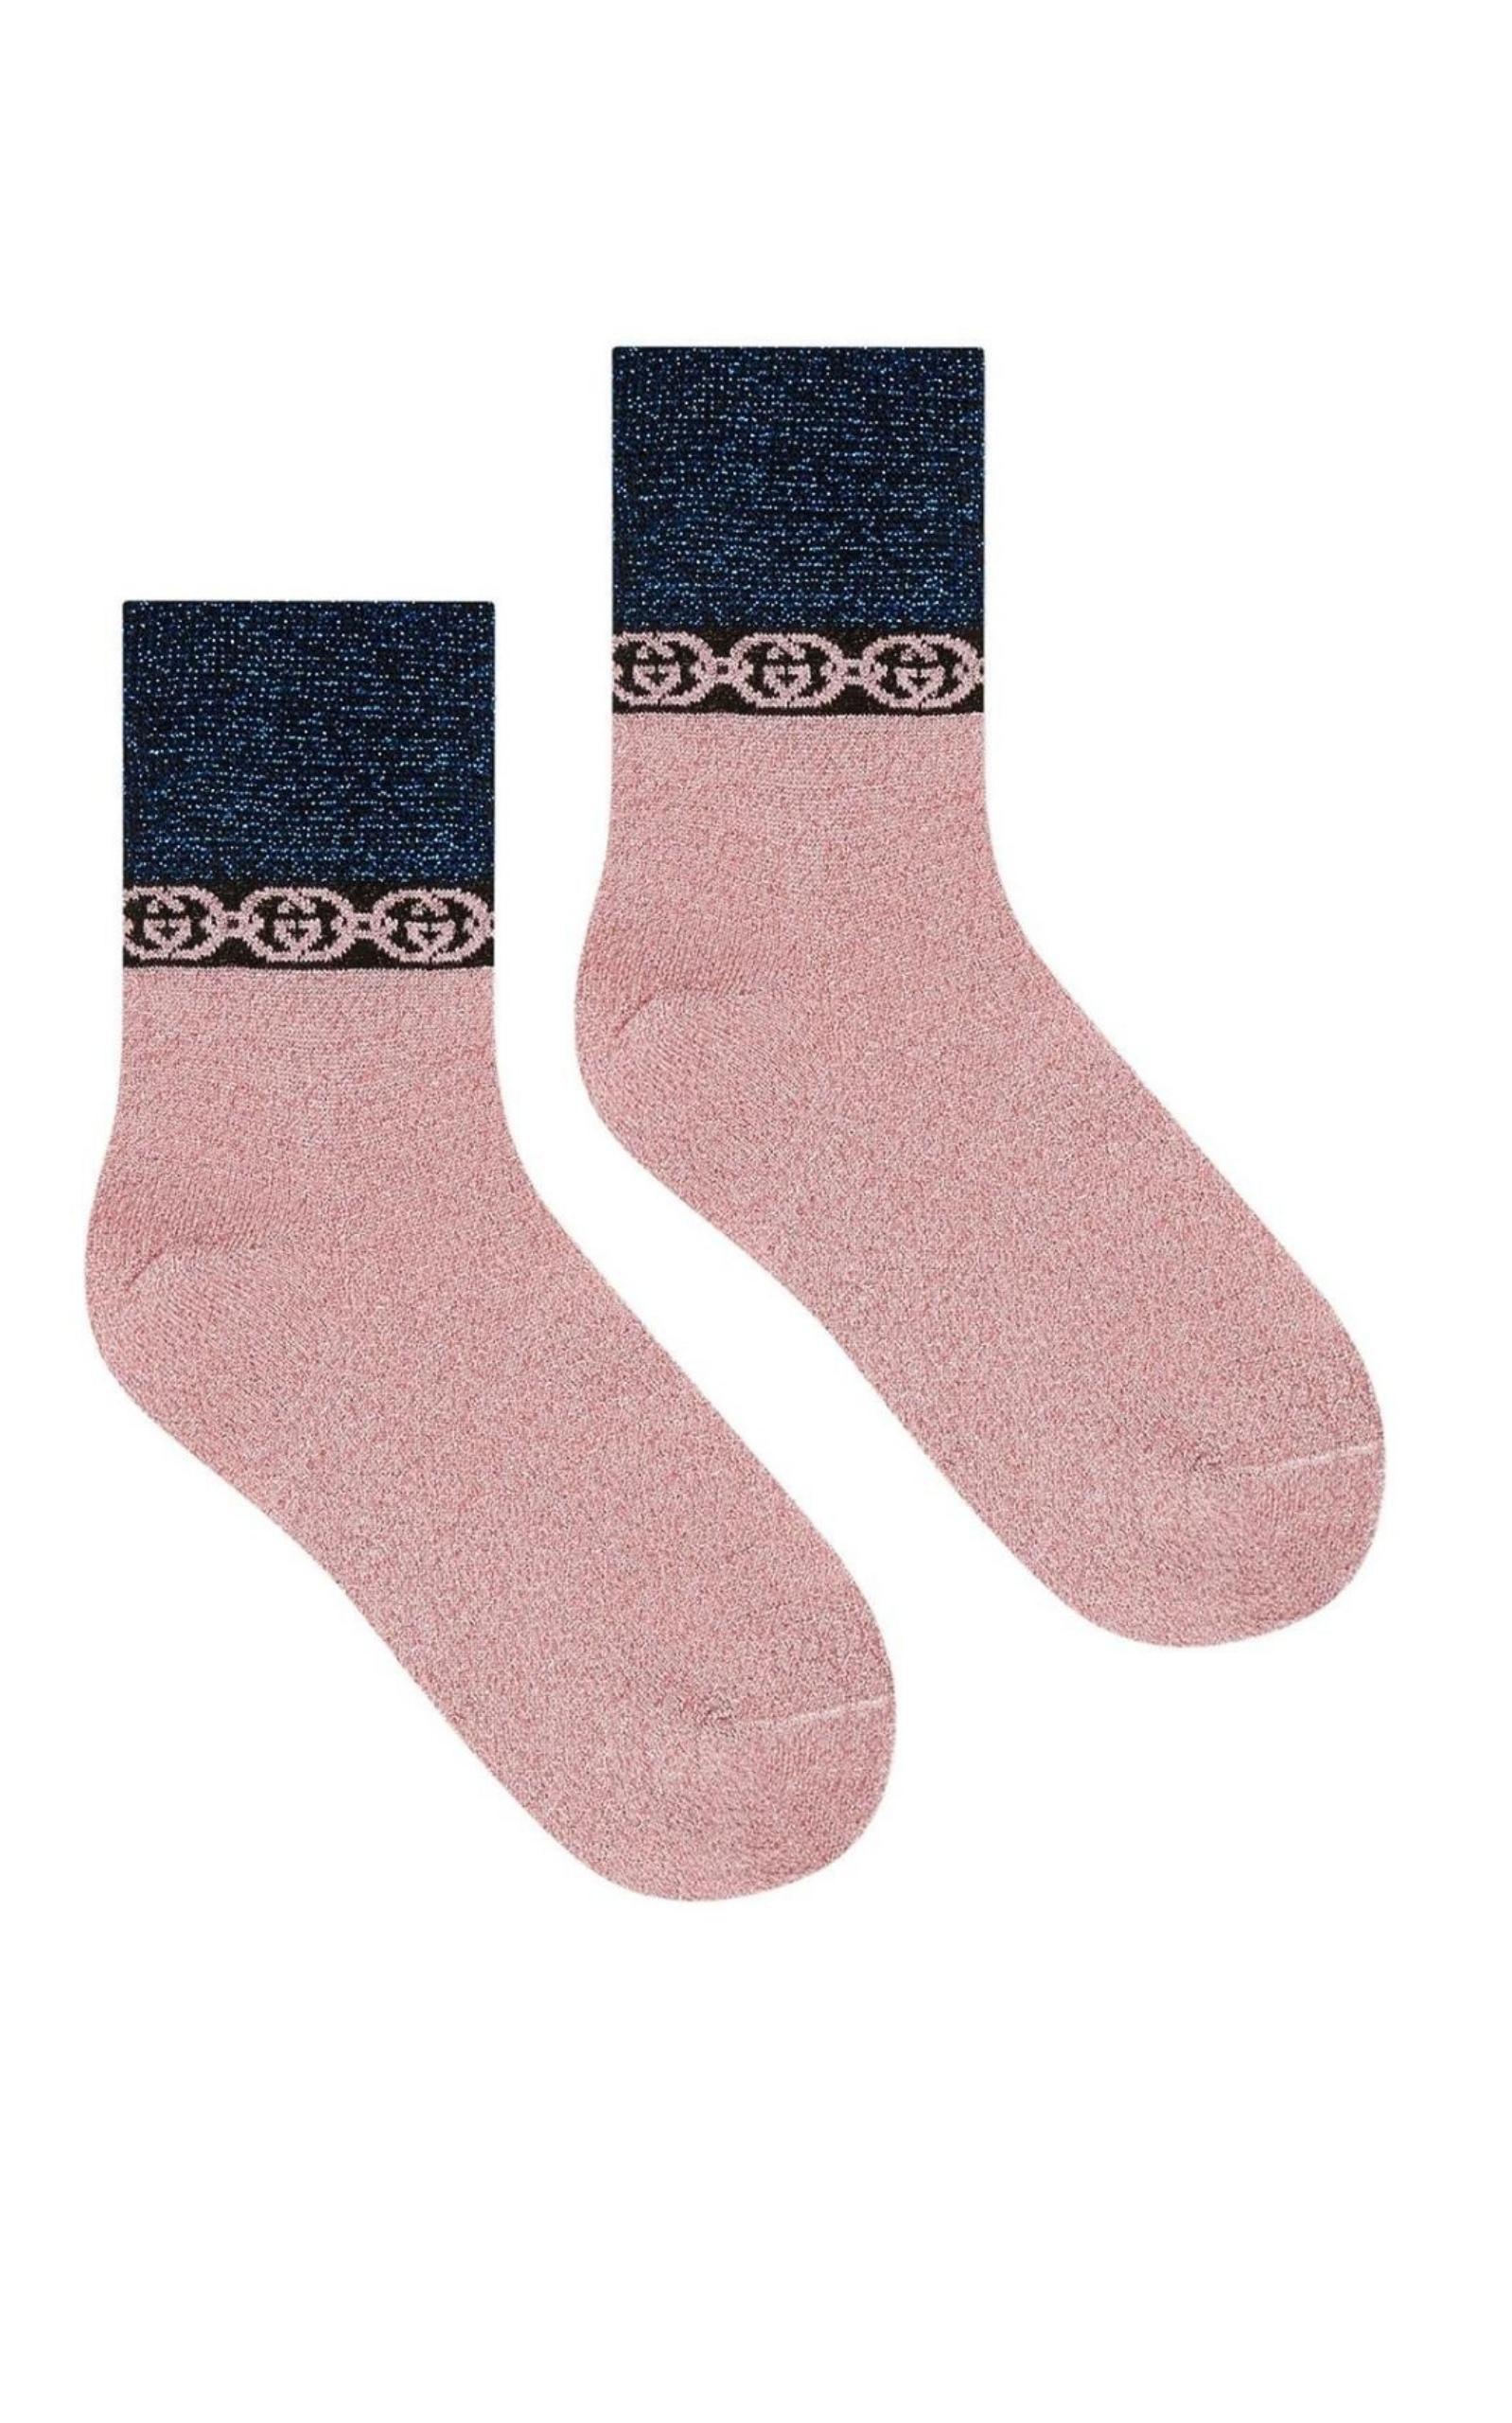 Gucci GG Embroidered Cotton Blend socks